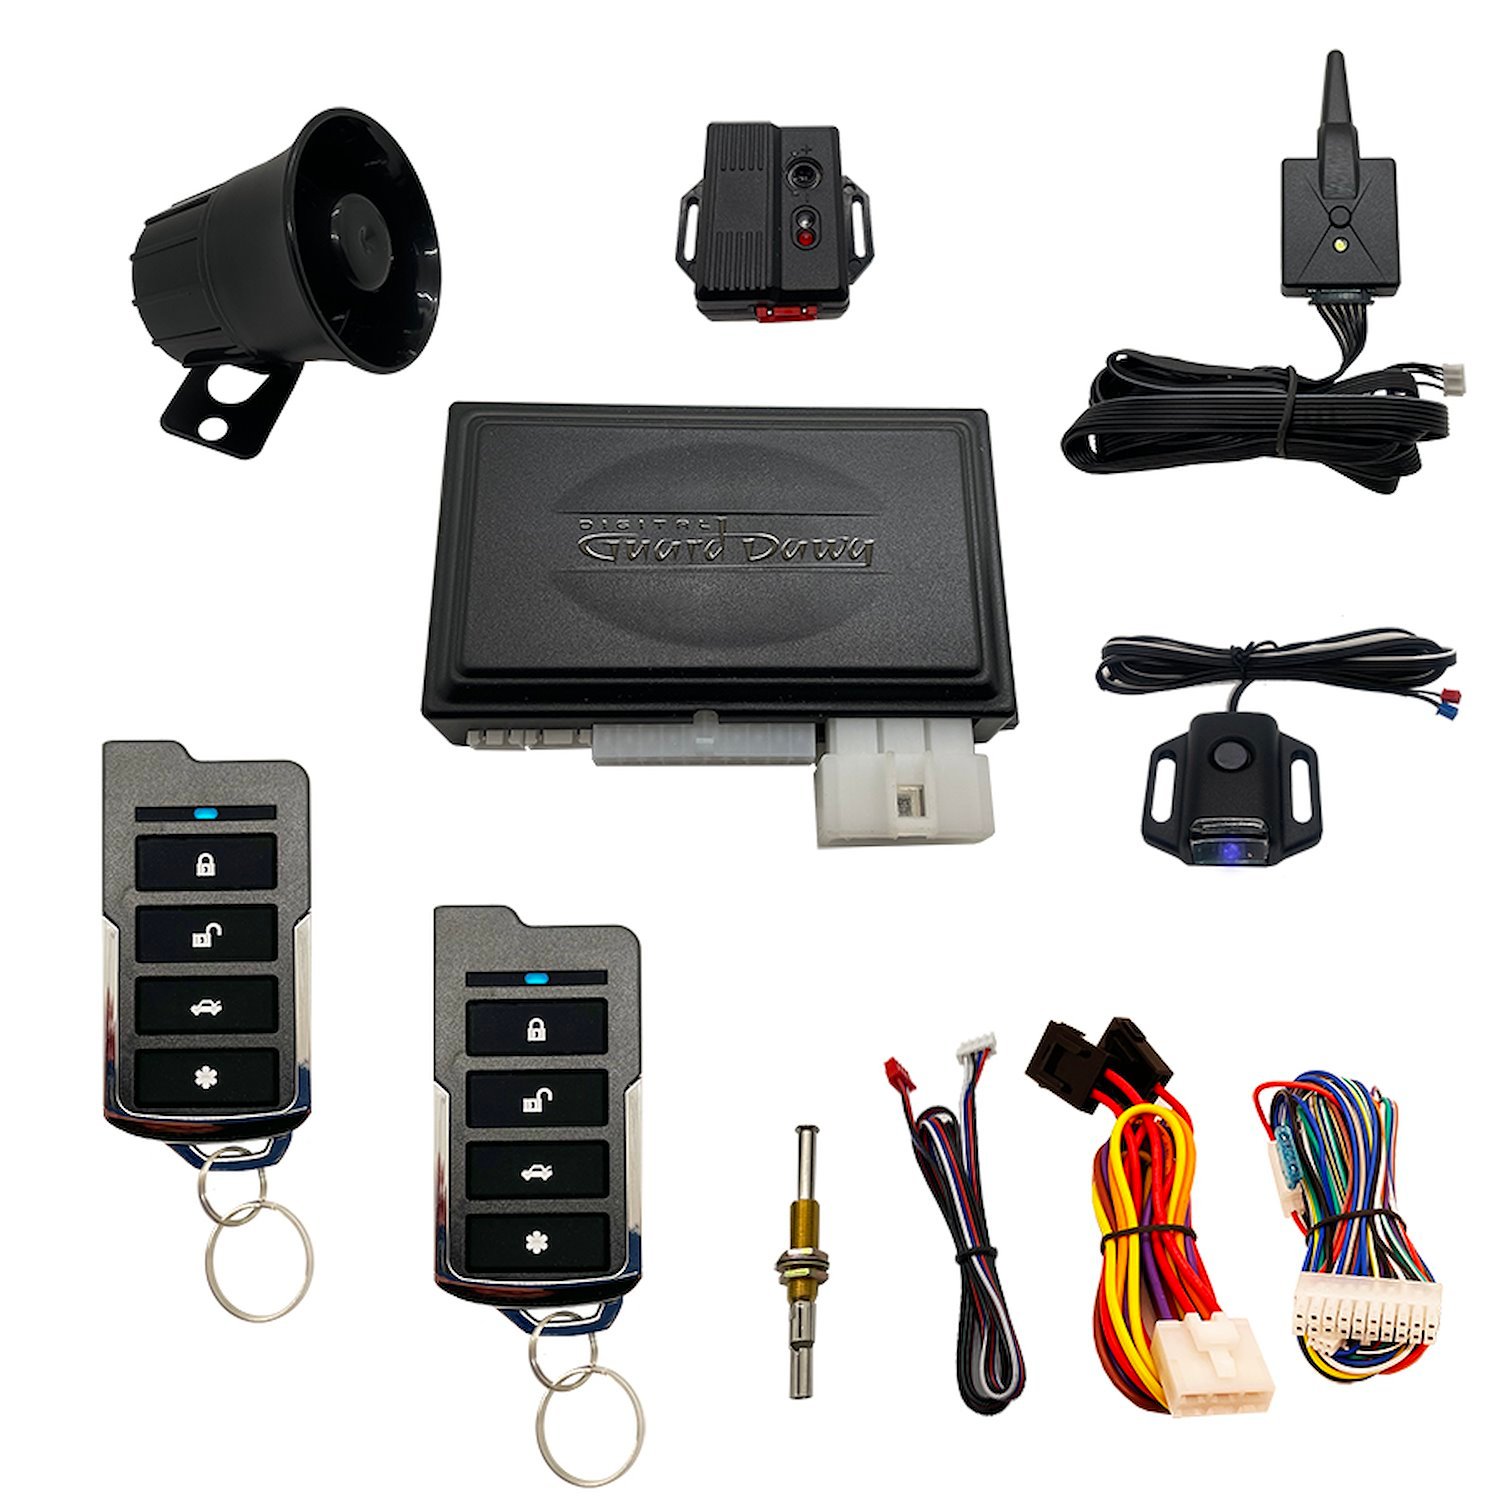 DGD-KY-ALM-RS1 Keyless Entry, Alarm System, and Remote Start, 1-Way